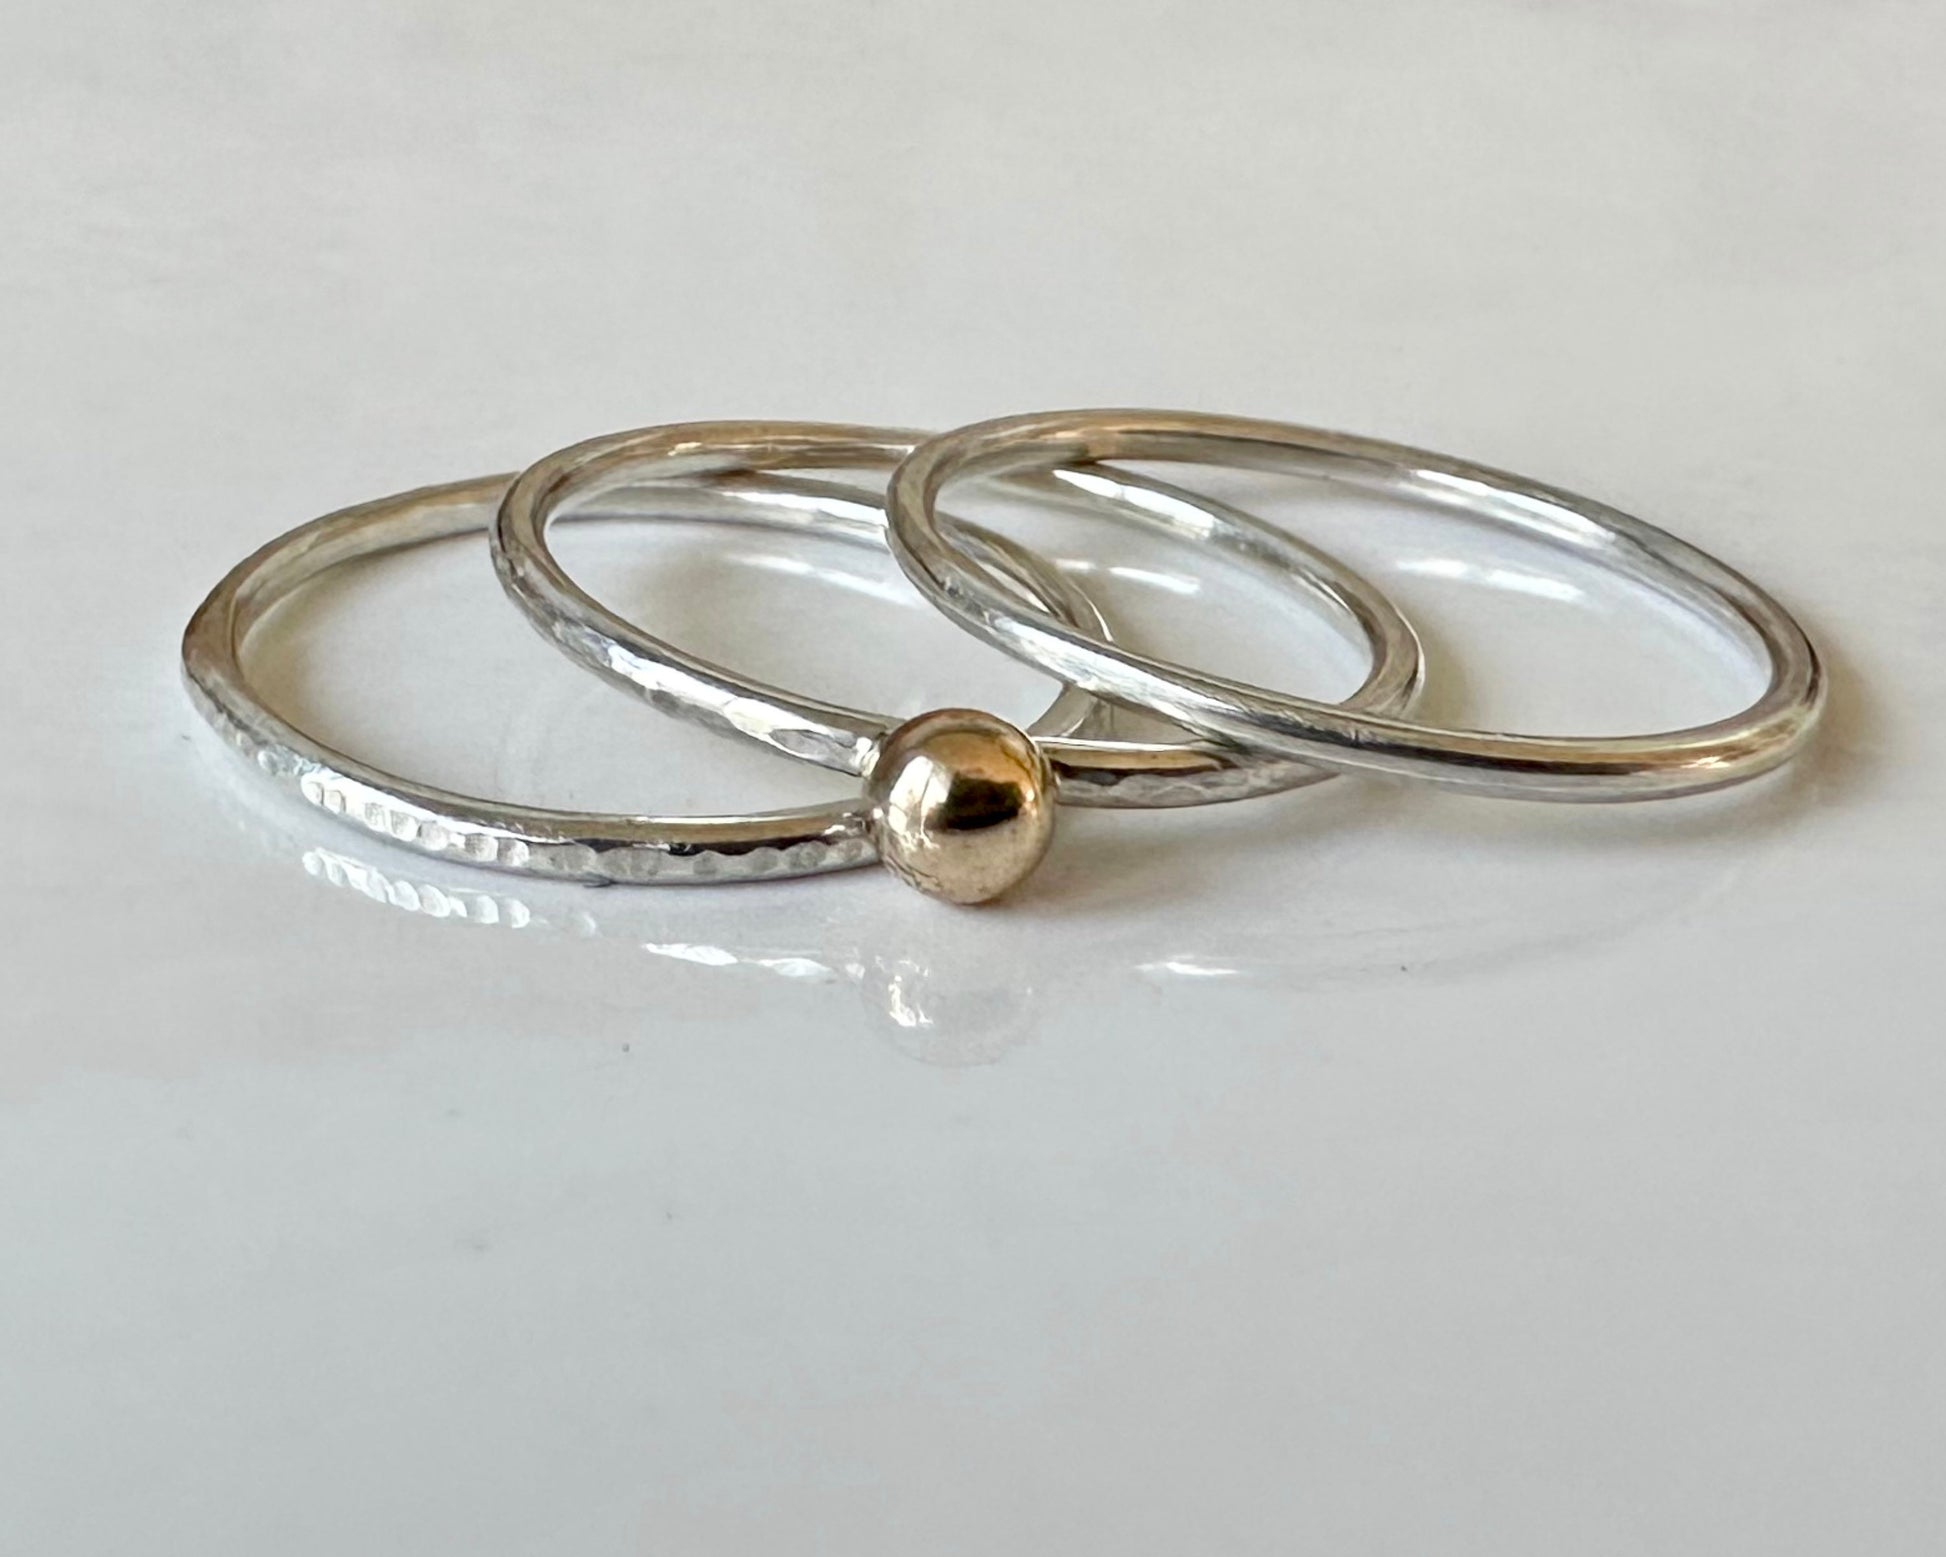 Gold Nugget on 1.2mm 925 sterling Silver Stacking Ring Set, Recycled Gold and Sterling Silver 1.2mm Skinny Minimalist Rings